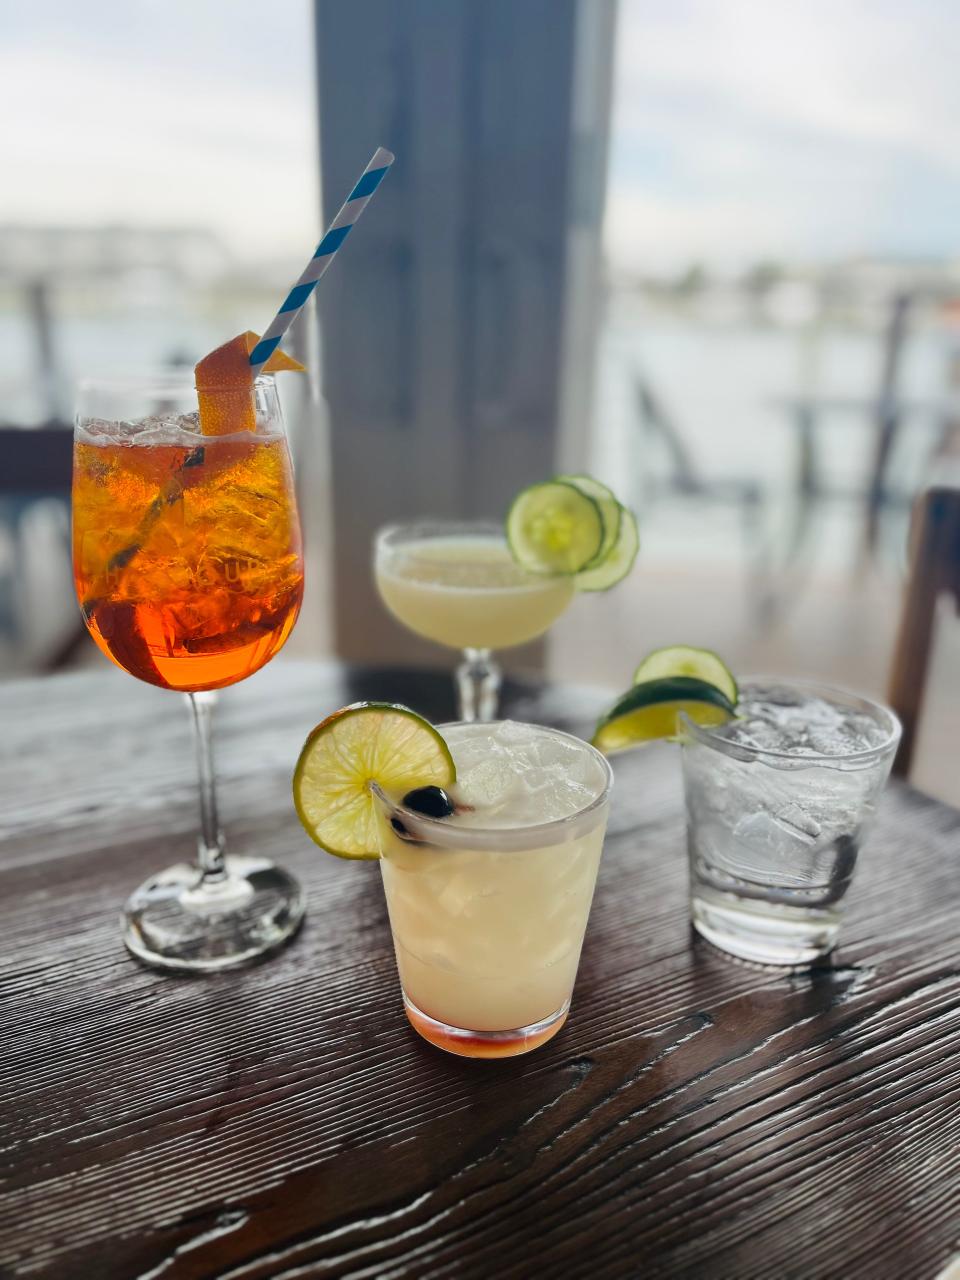 Harbour Restaurant in Lewes has an extensive nonalcoholic beverage menu. Cocktail highlights include Avant Garden, Dry Tai, Float On and Couldn't Be Bitter.